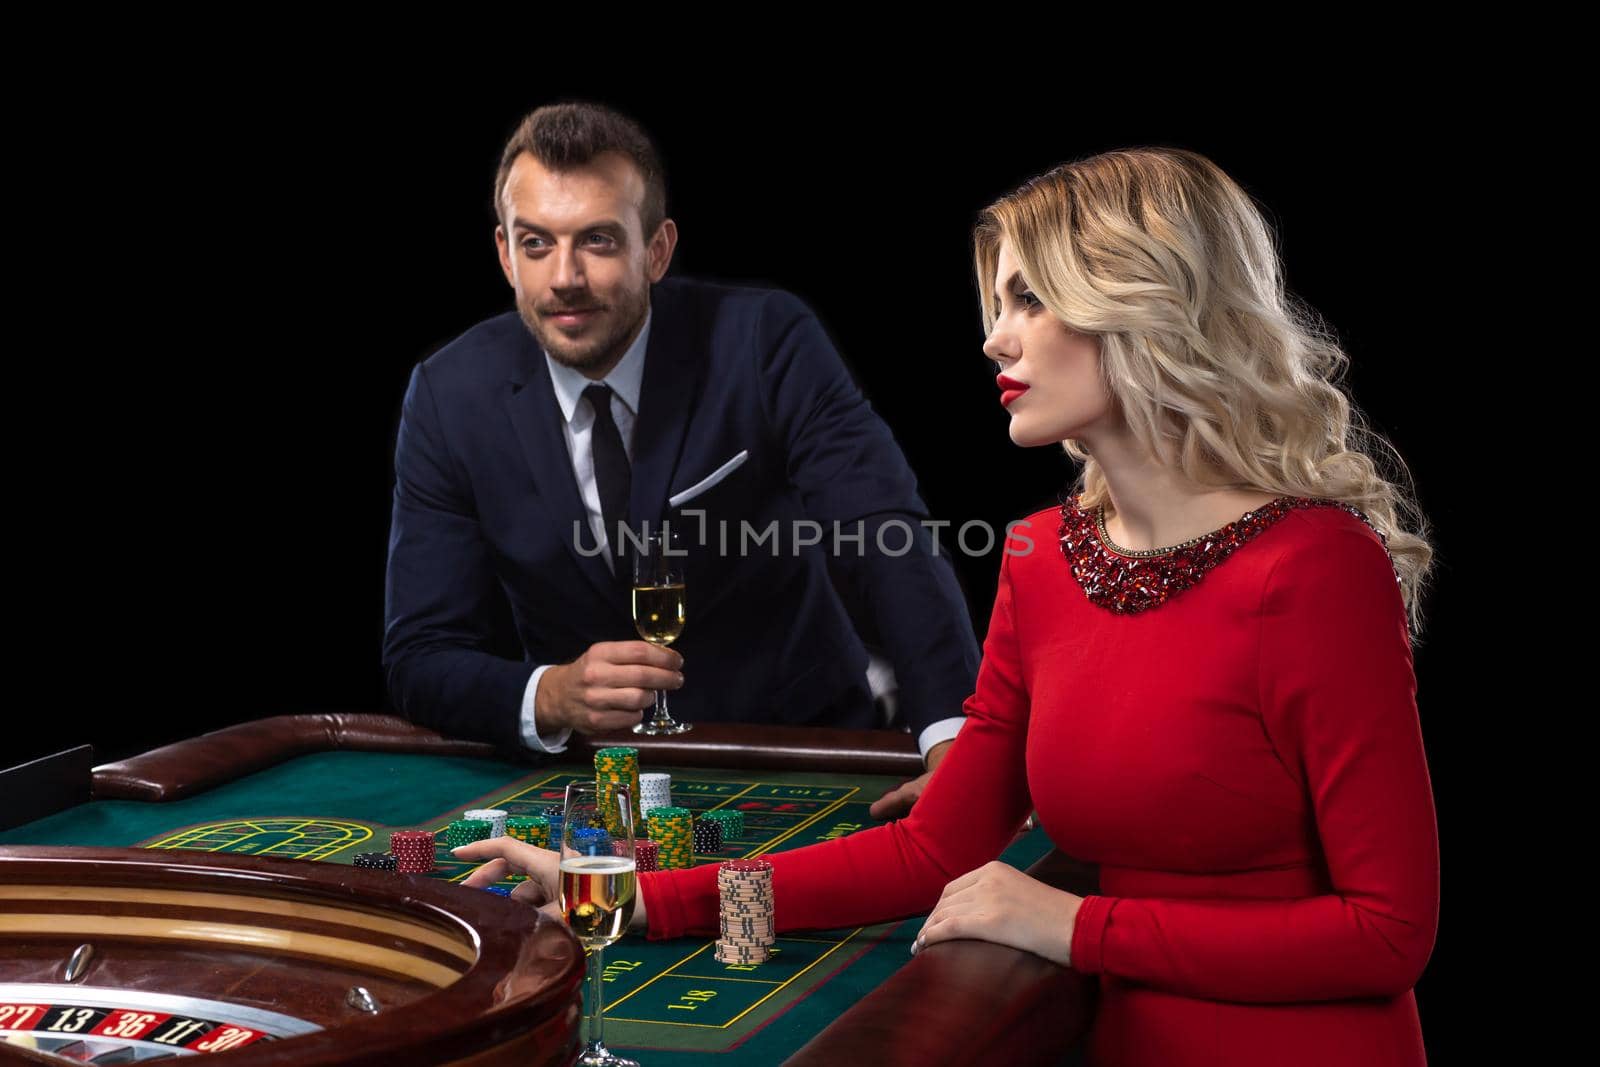 A beautiful young woman and a man are sitting at a roulette table. Casino. Black background. Excitement. Risk. Luck